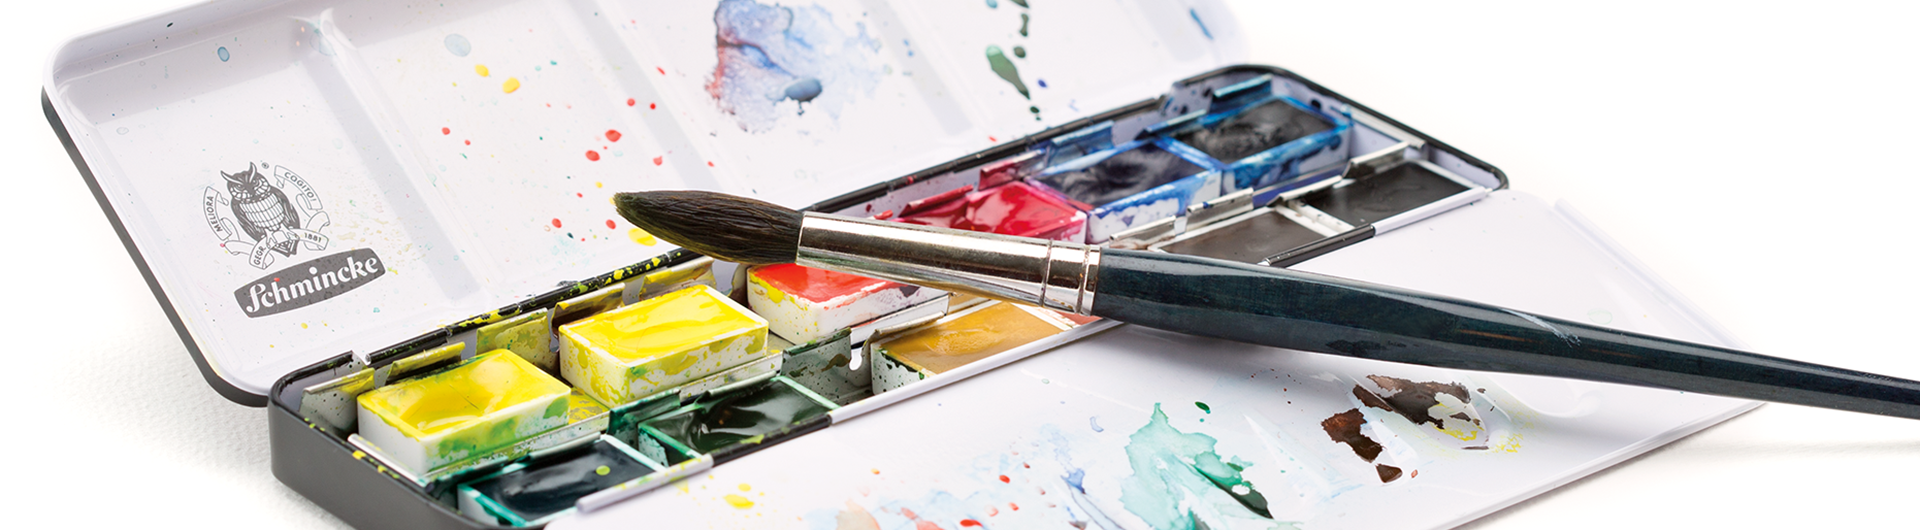 Painting Sets - Oil, Acrylic and Watercolour